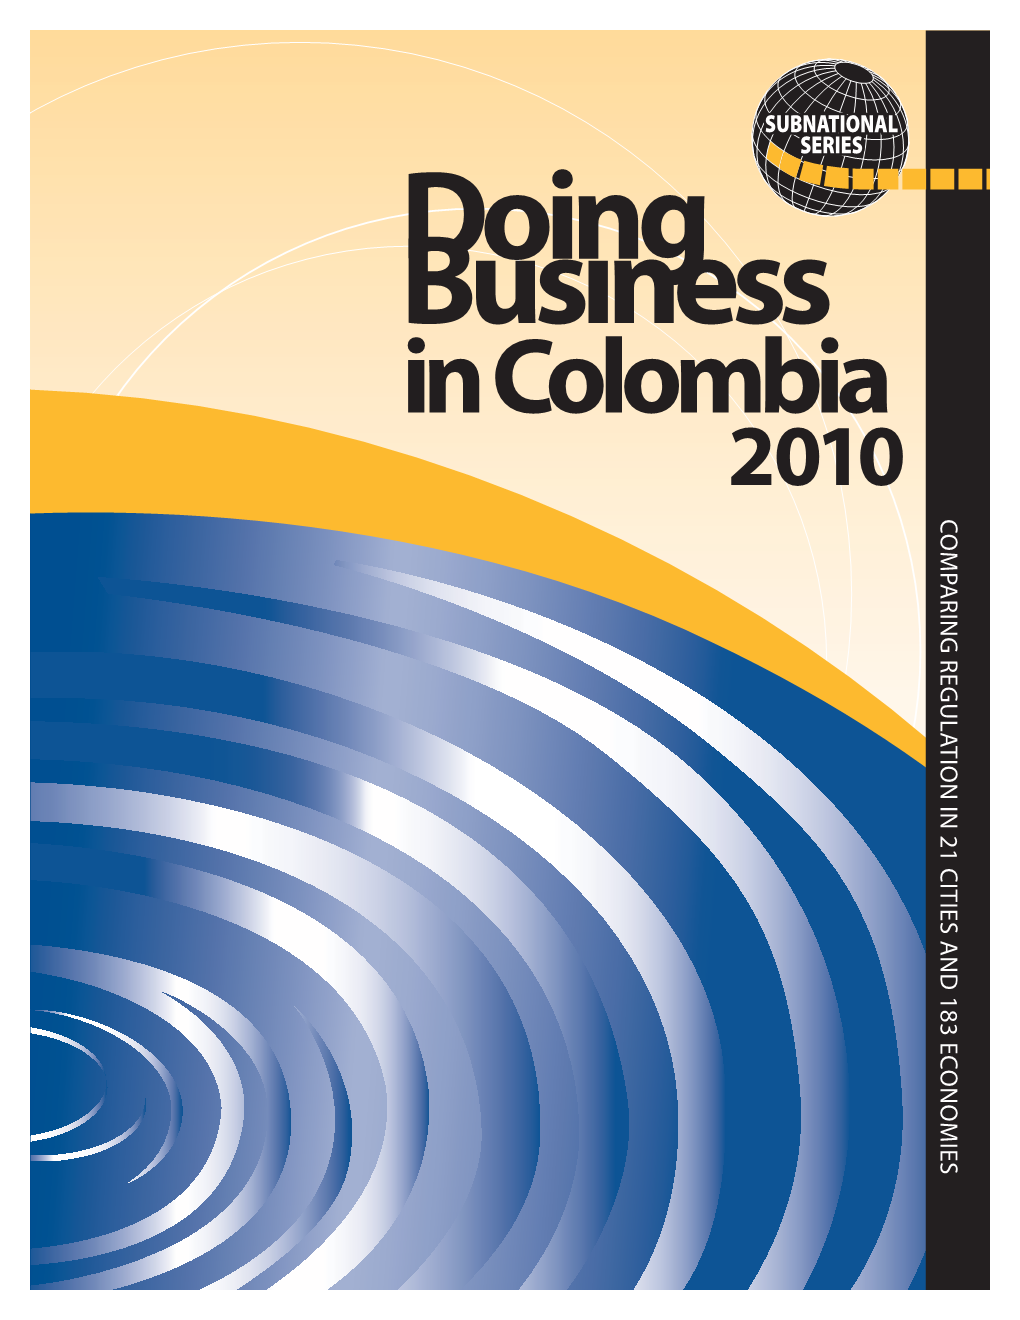 Doing Business in Colombia 2010 and Other Subnational and Regional Doing Business Studies Can Be Downloaded at No Charge At